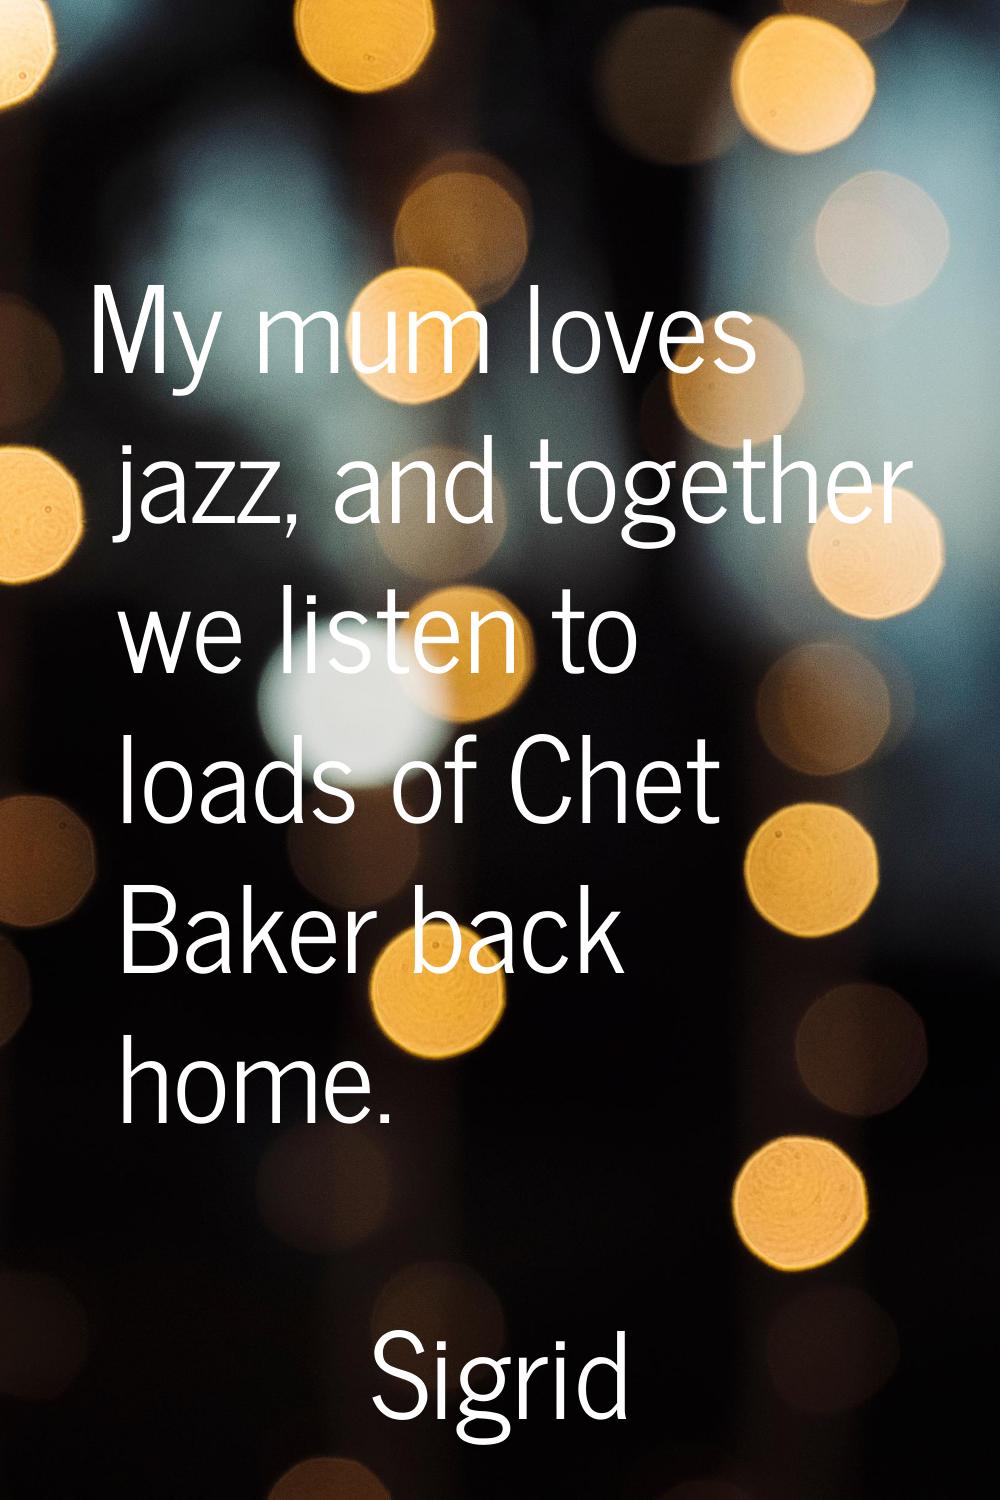 My mum loves jazz, and together we listen to loads of Chet Baker back home.